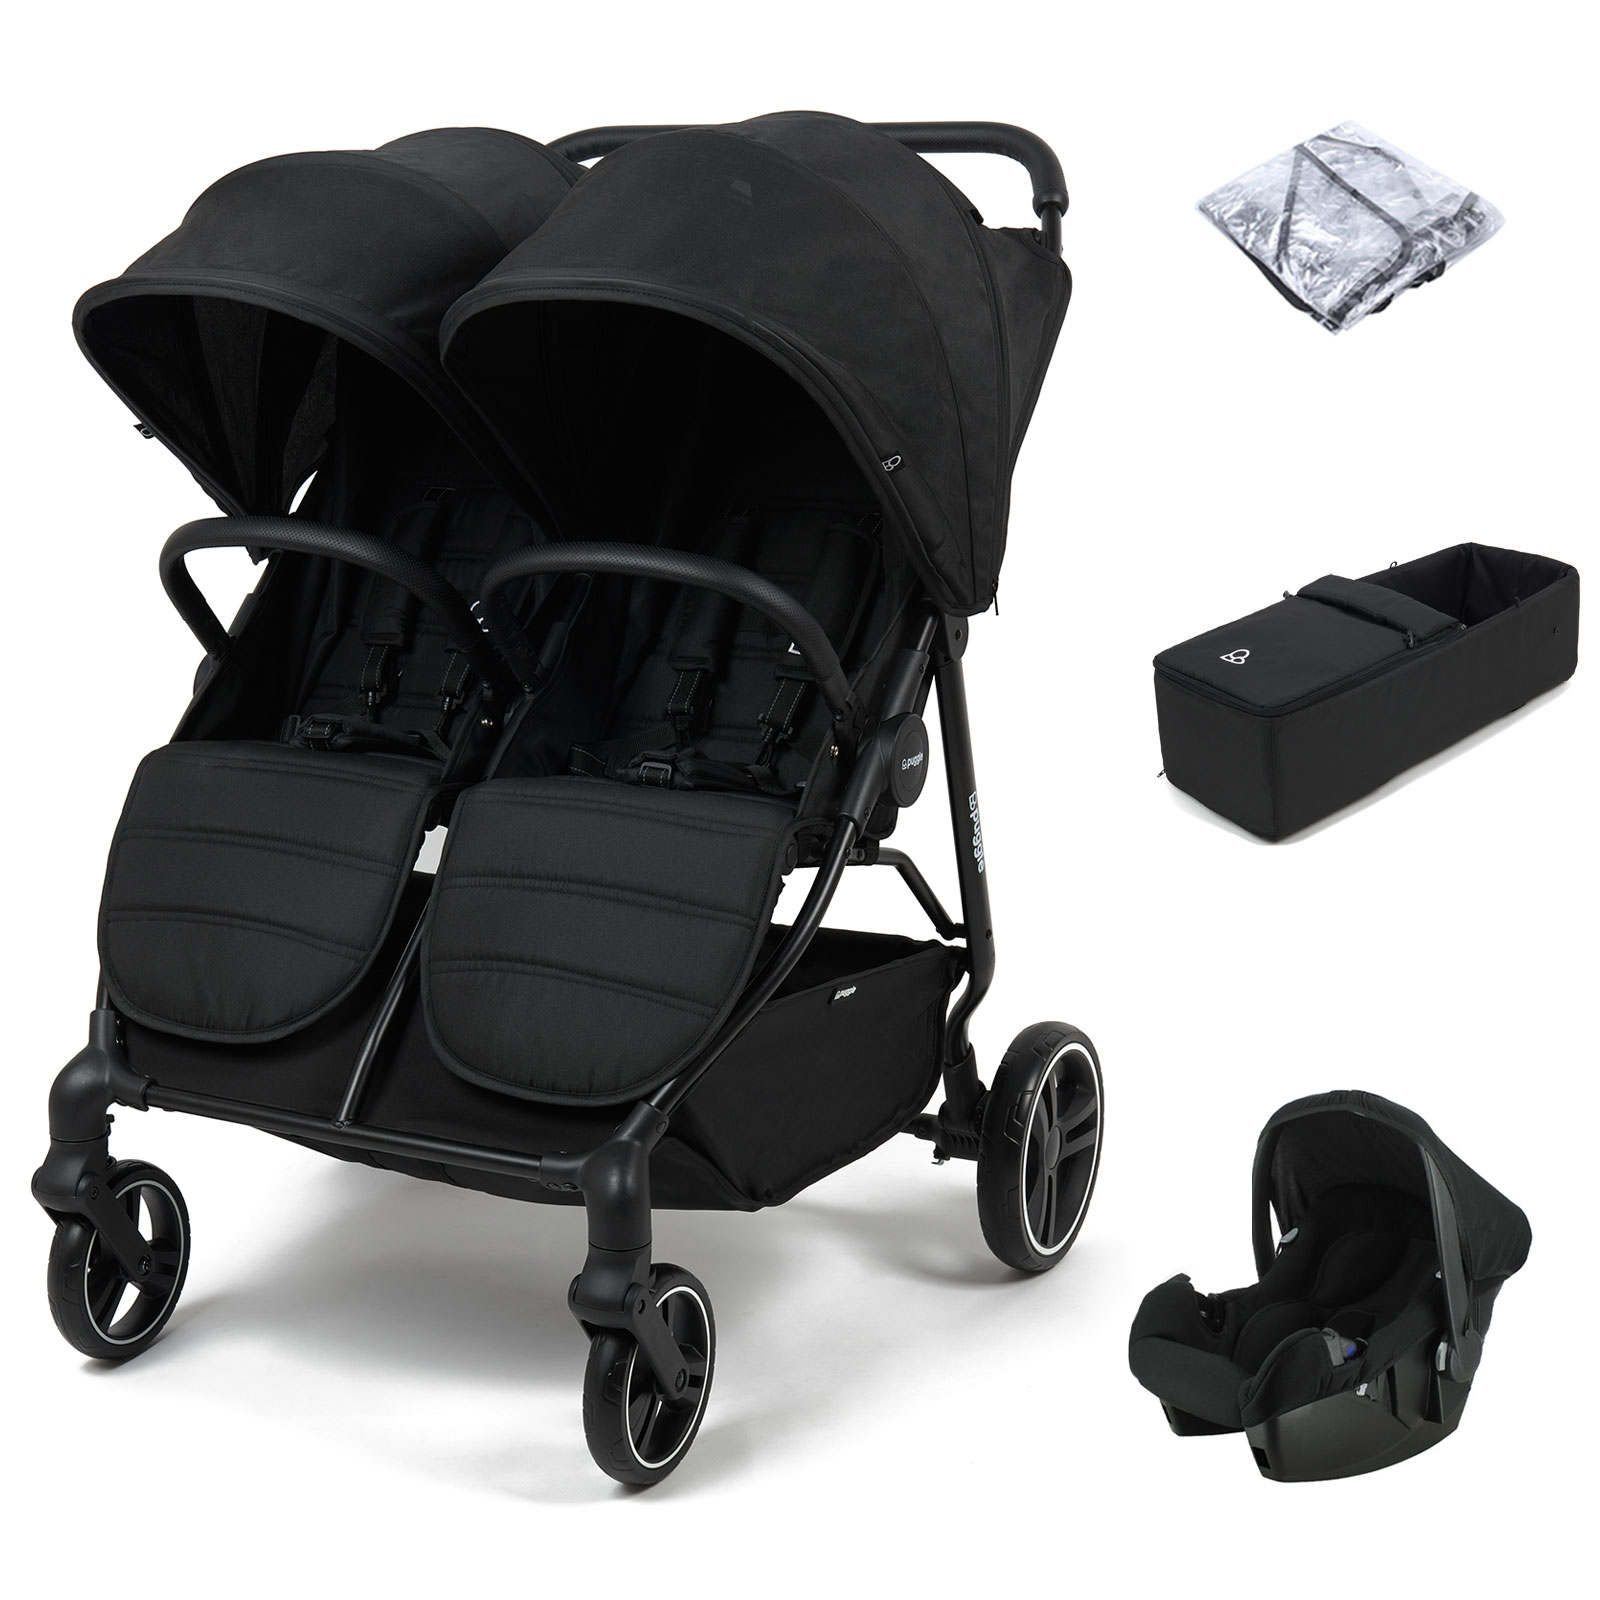 Puggle Urban City Easyfold Twin Travel System Bundle with 1 Beone Car Seat & 1 Soft Carrycot - Storm Black